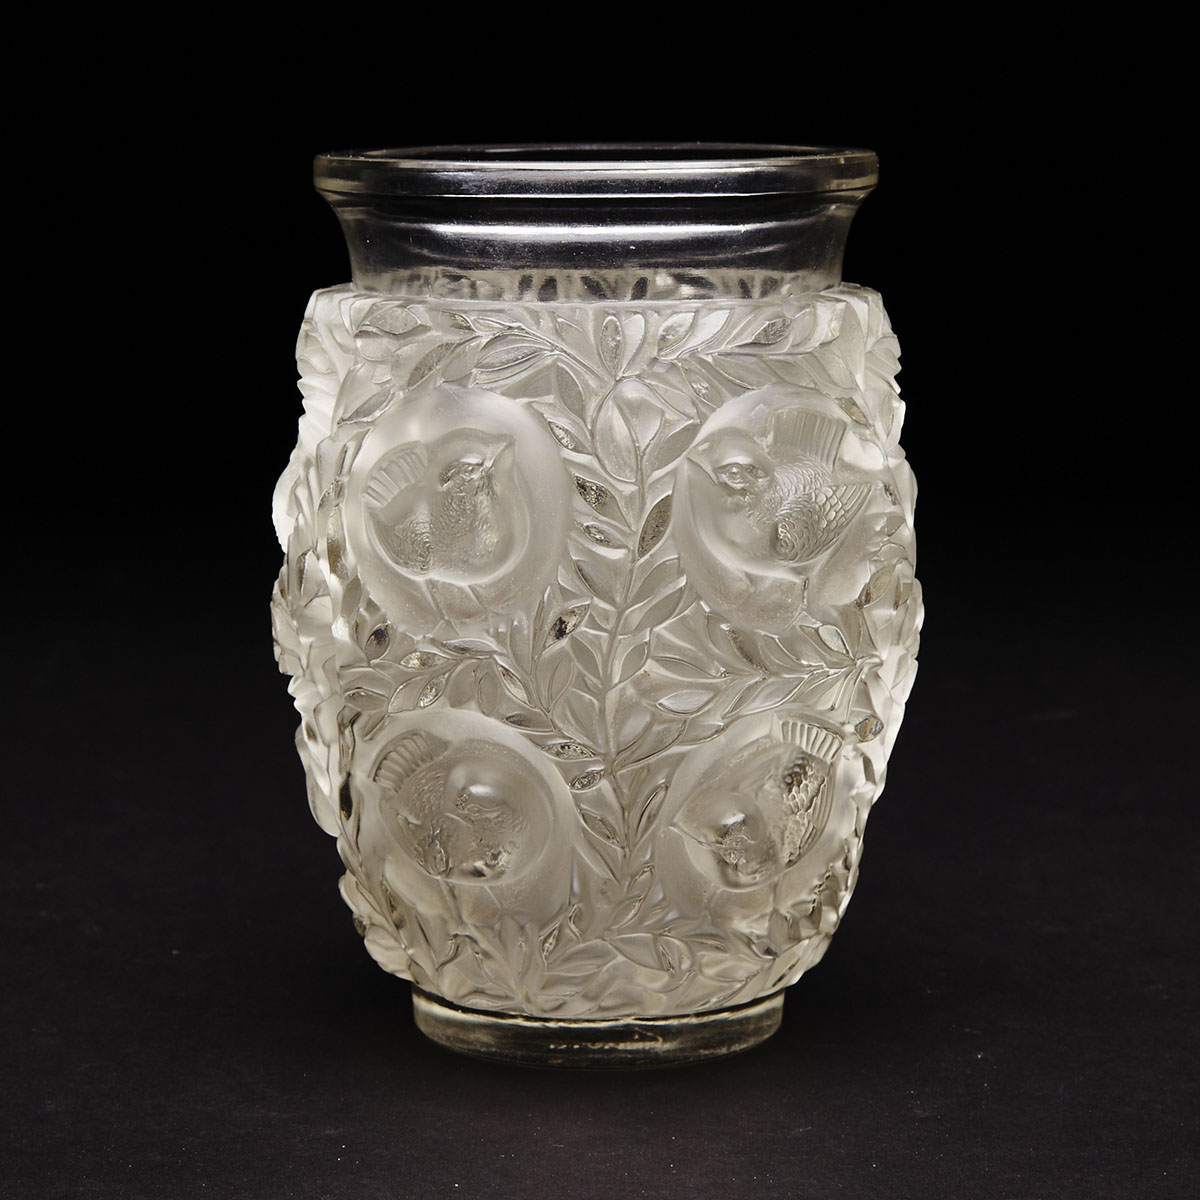 ‘Bagatelle’, Lalique Moulded and Frosted Glass Vase, c.1940